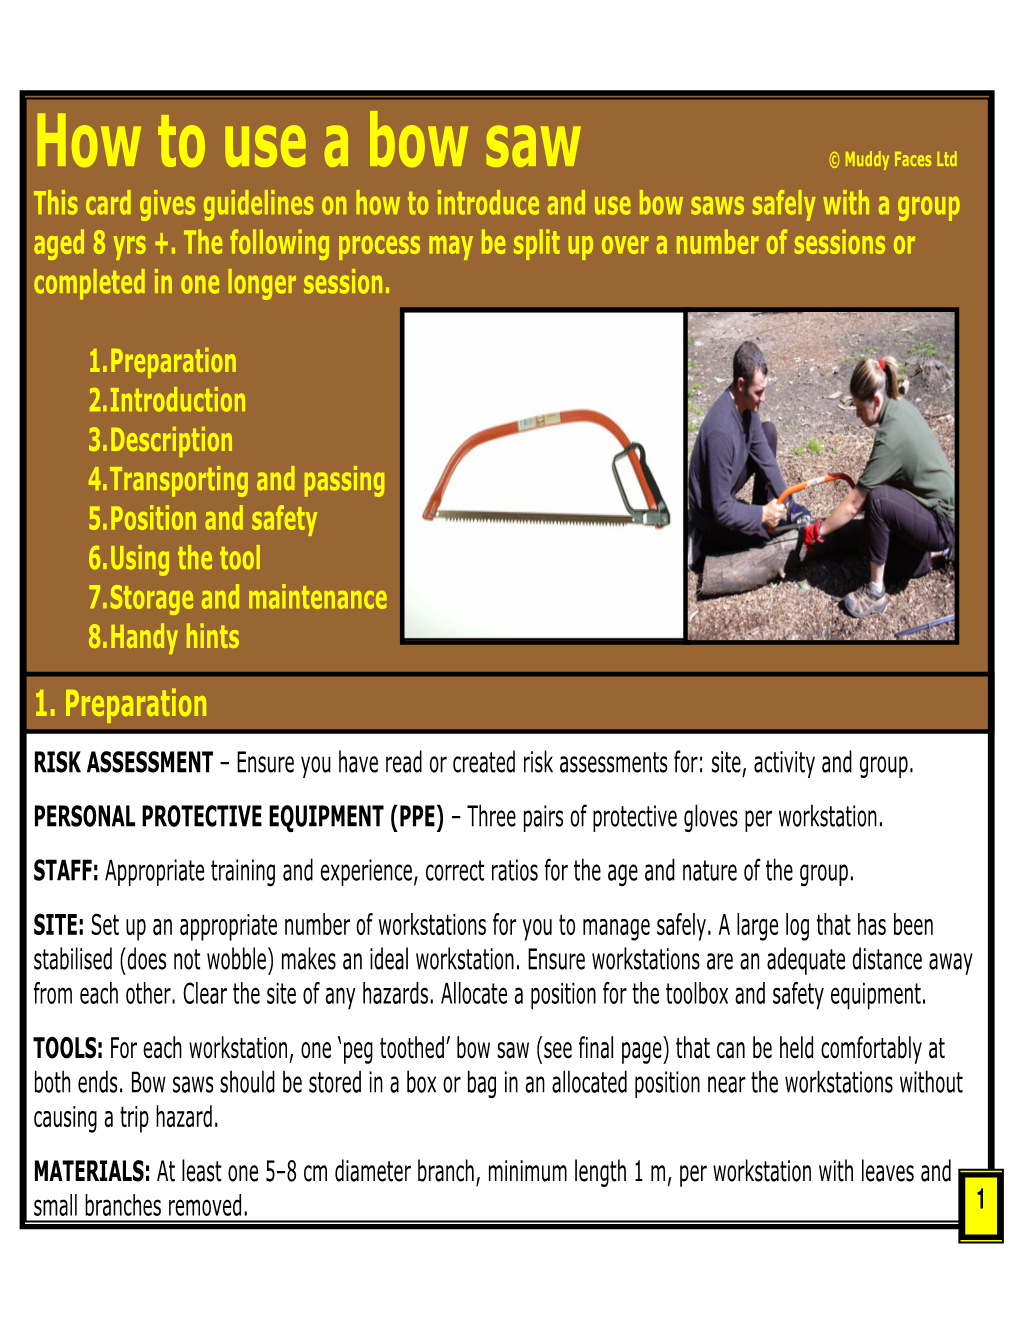 How to Use a Bow Saw © Muddy Faces Ltd This Card Gives Guidelines on How to Introduce and Use Bow Saws Safely with a Group Aged 8 Yrs +